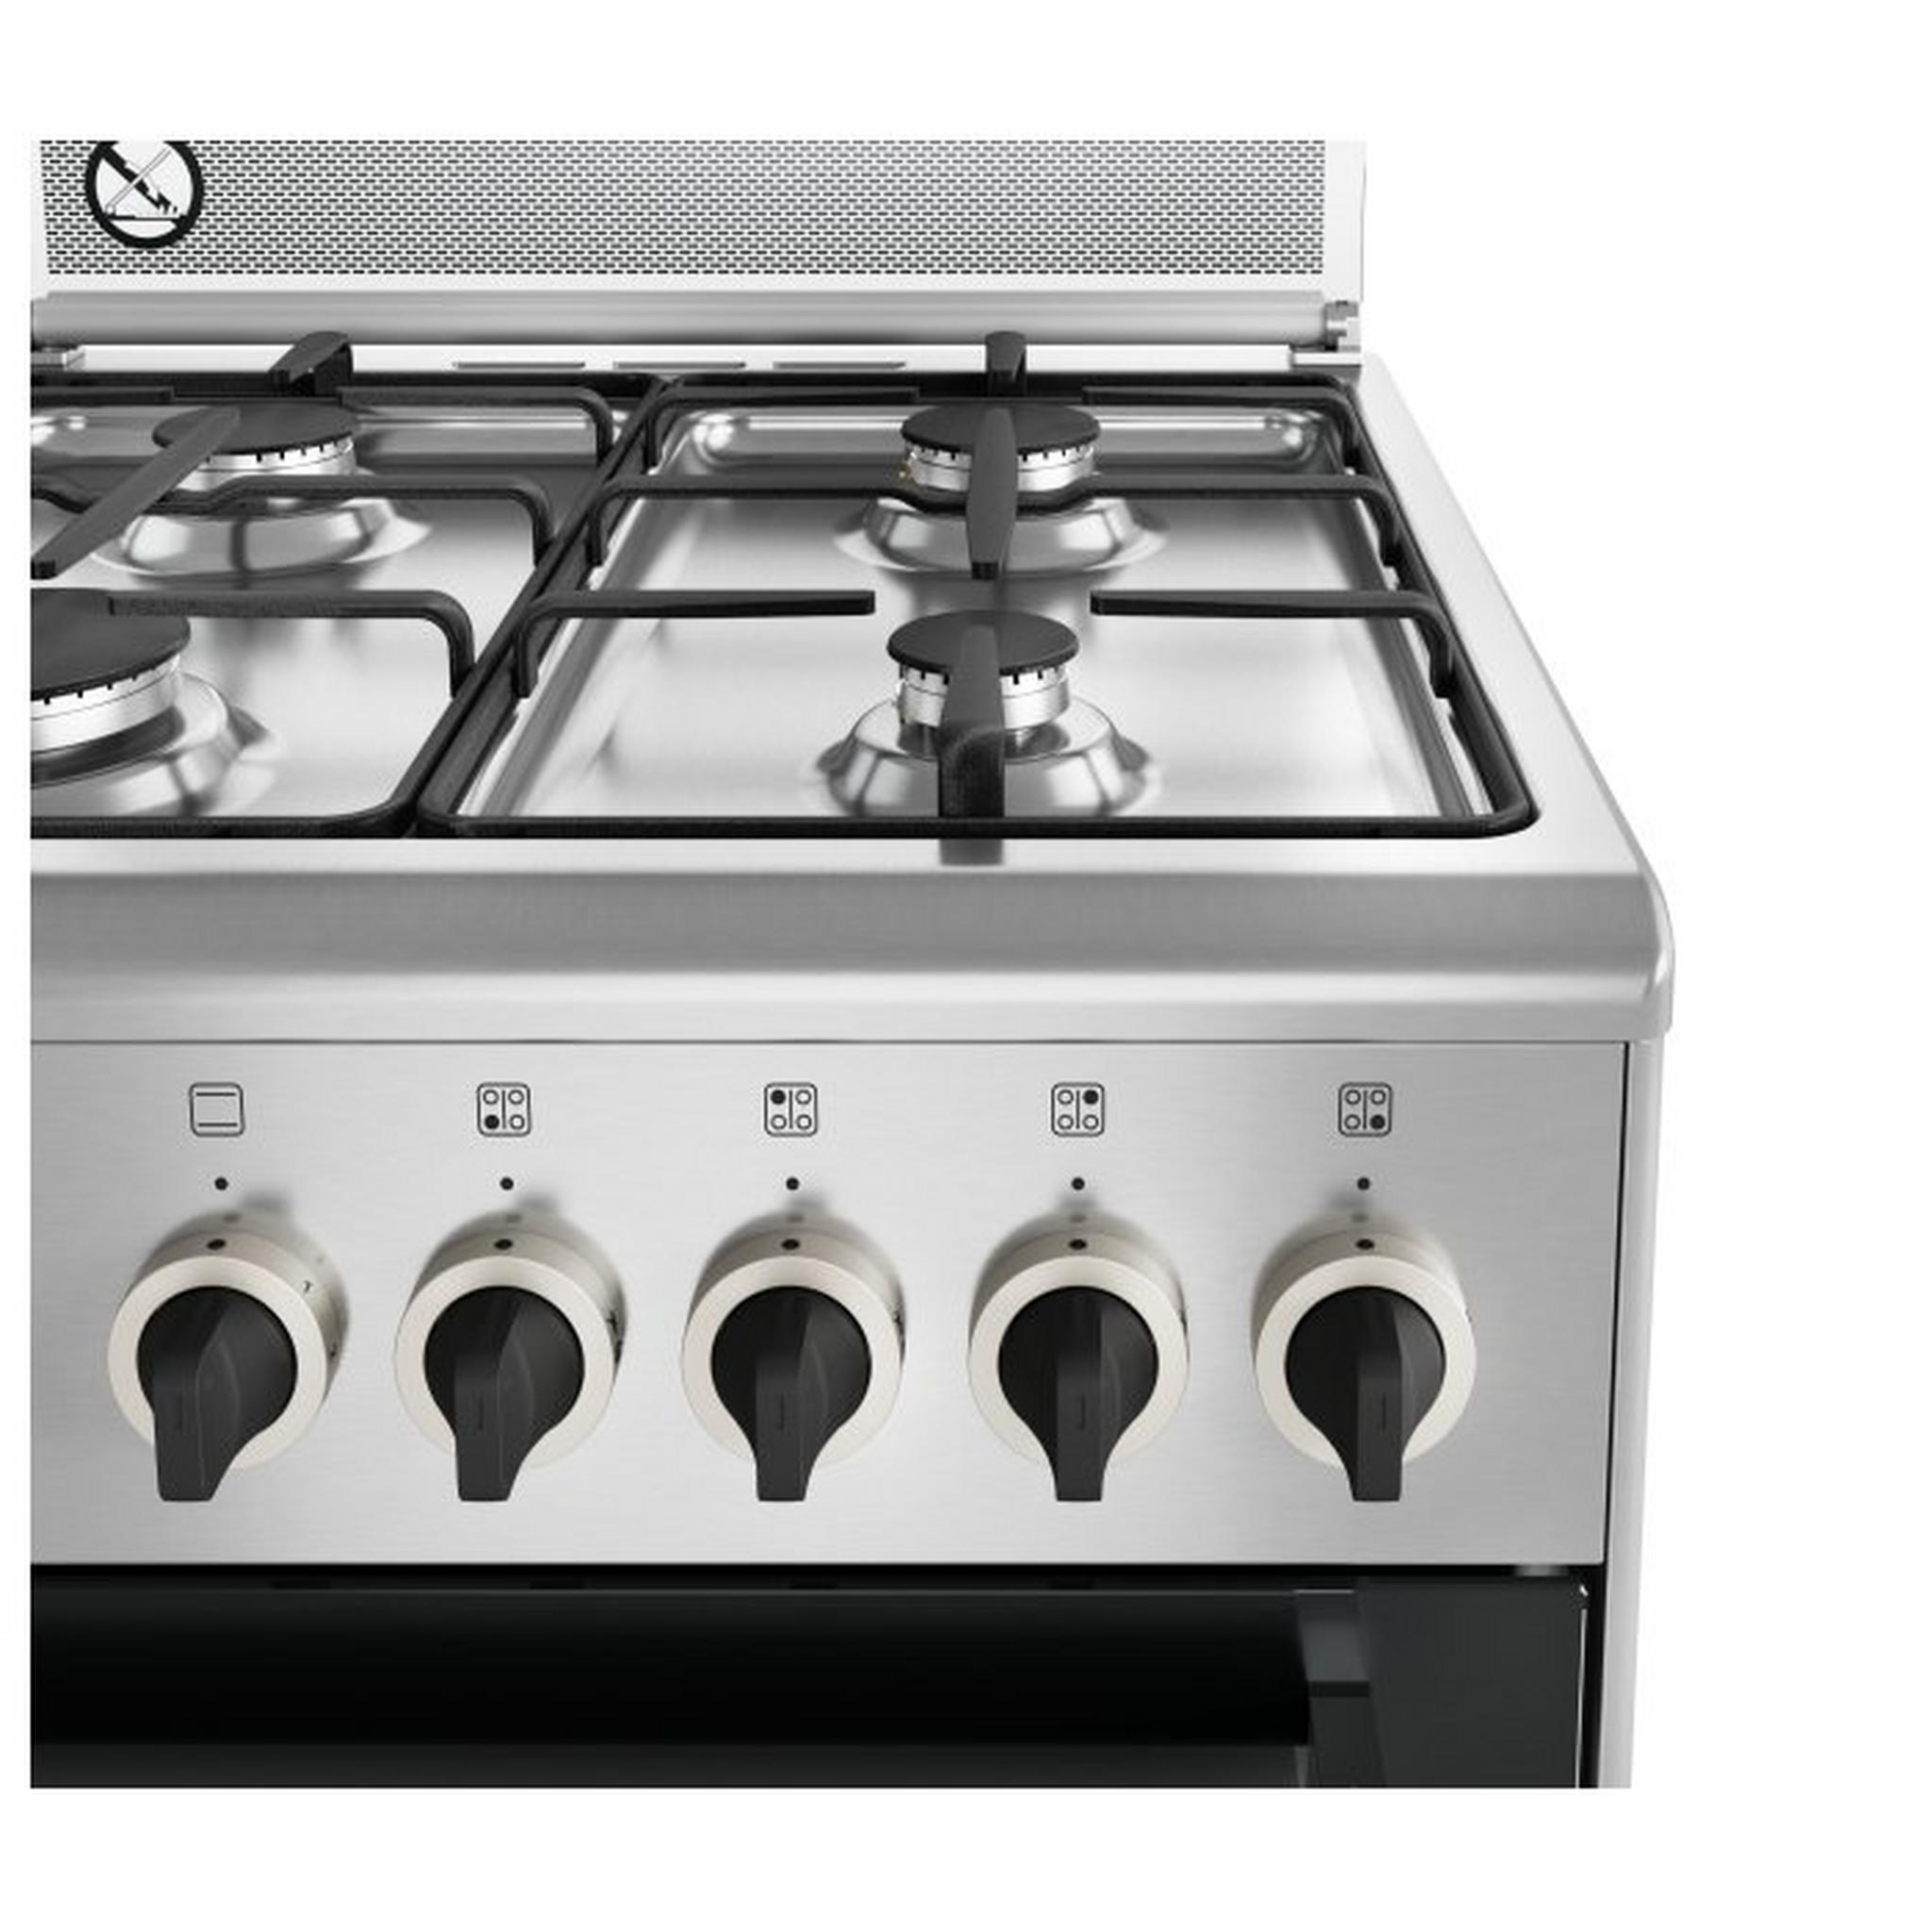 Lagermania 4 Burners Gas Cooker, 60X60cm, M64031EX0 - Stainless Steel